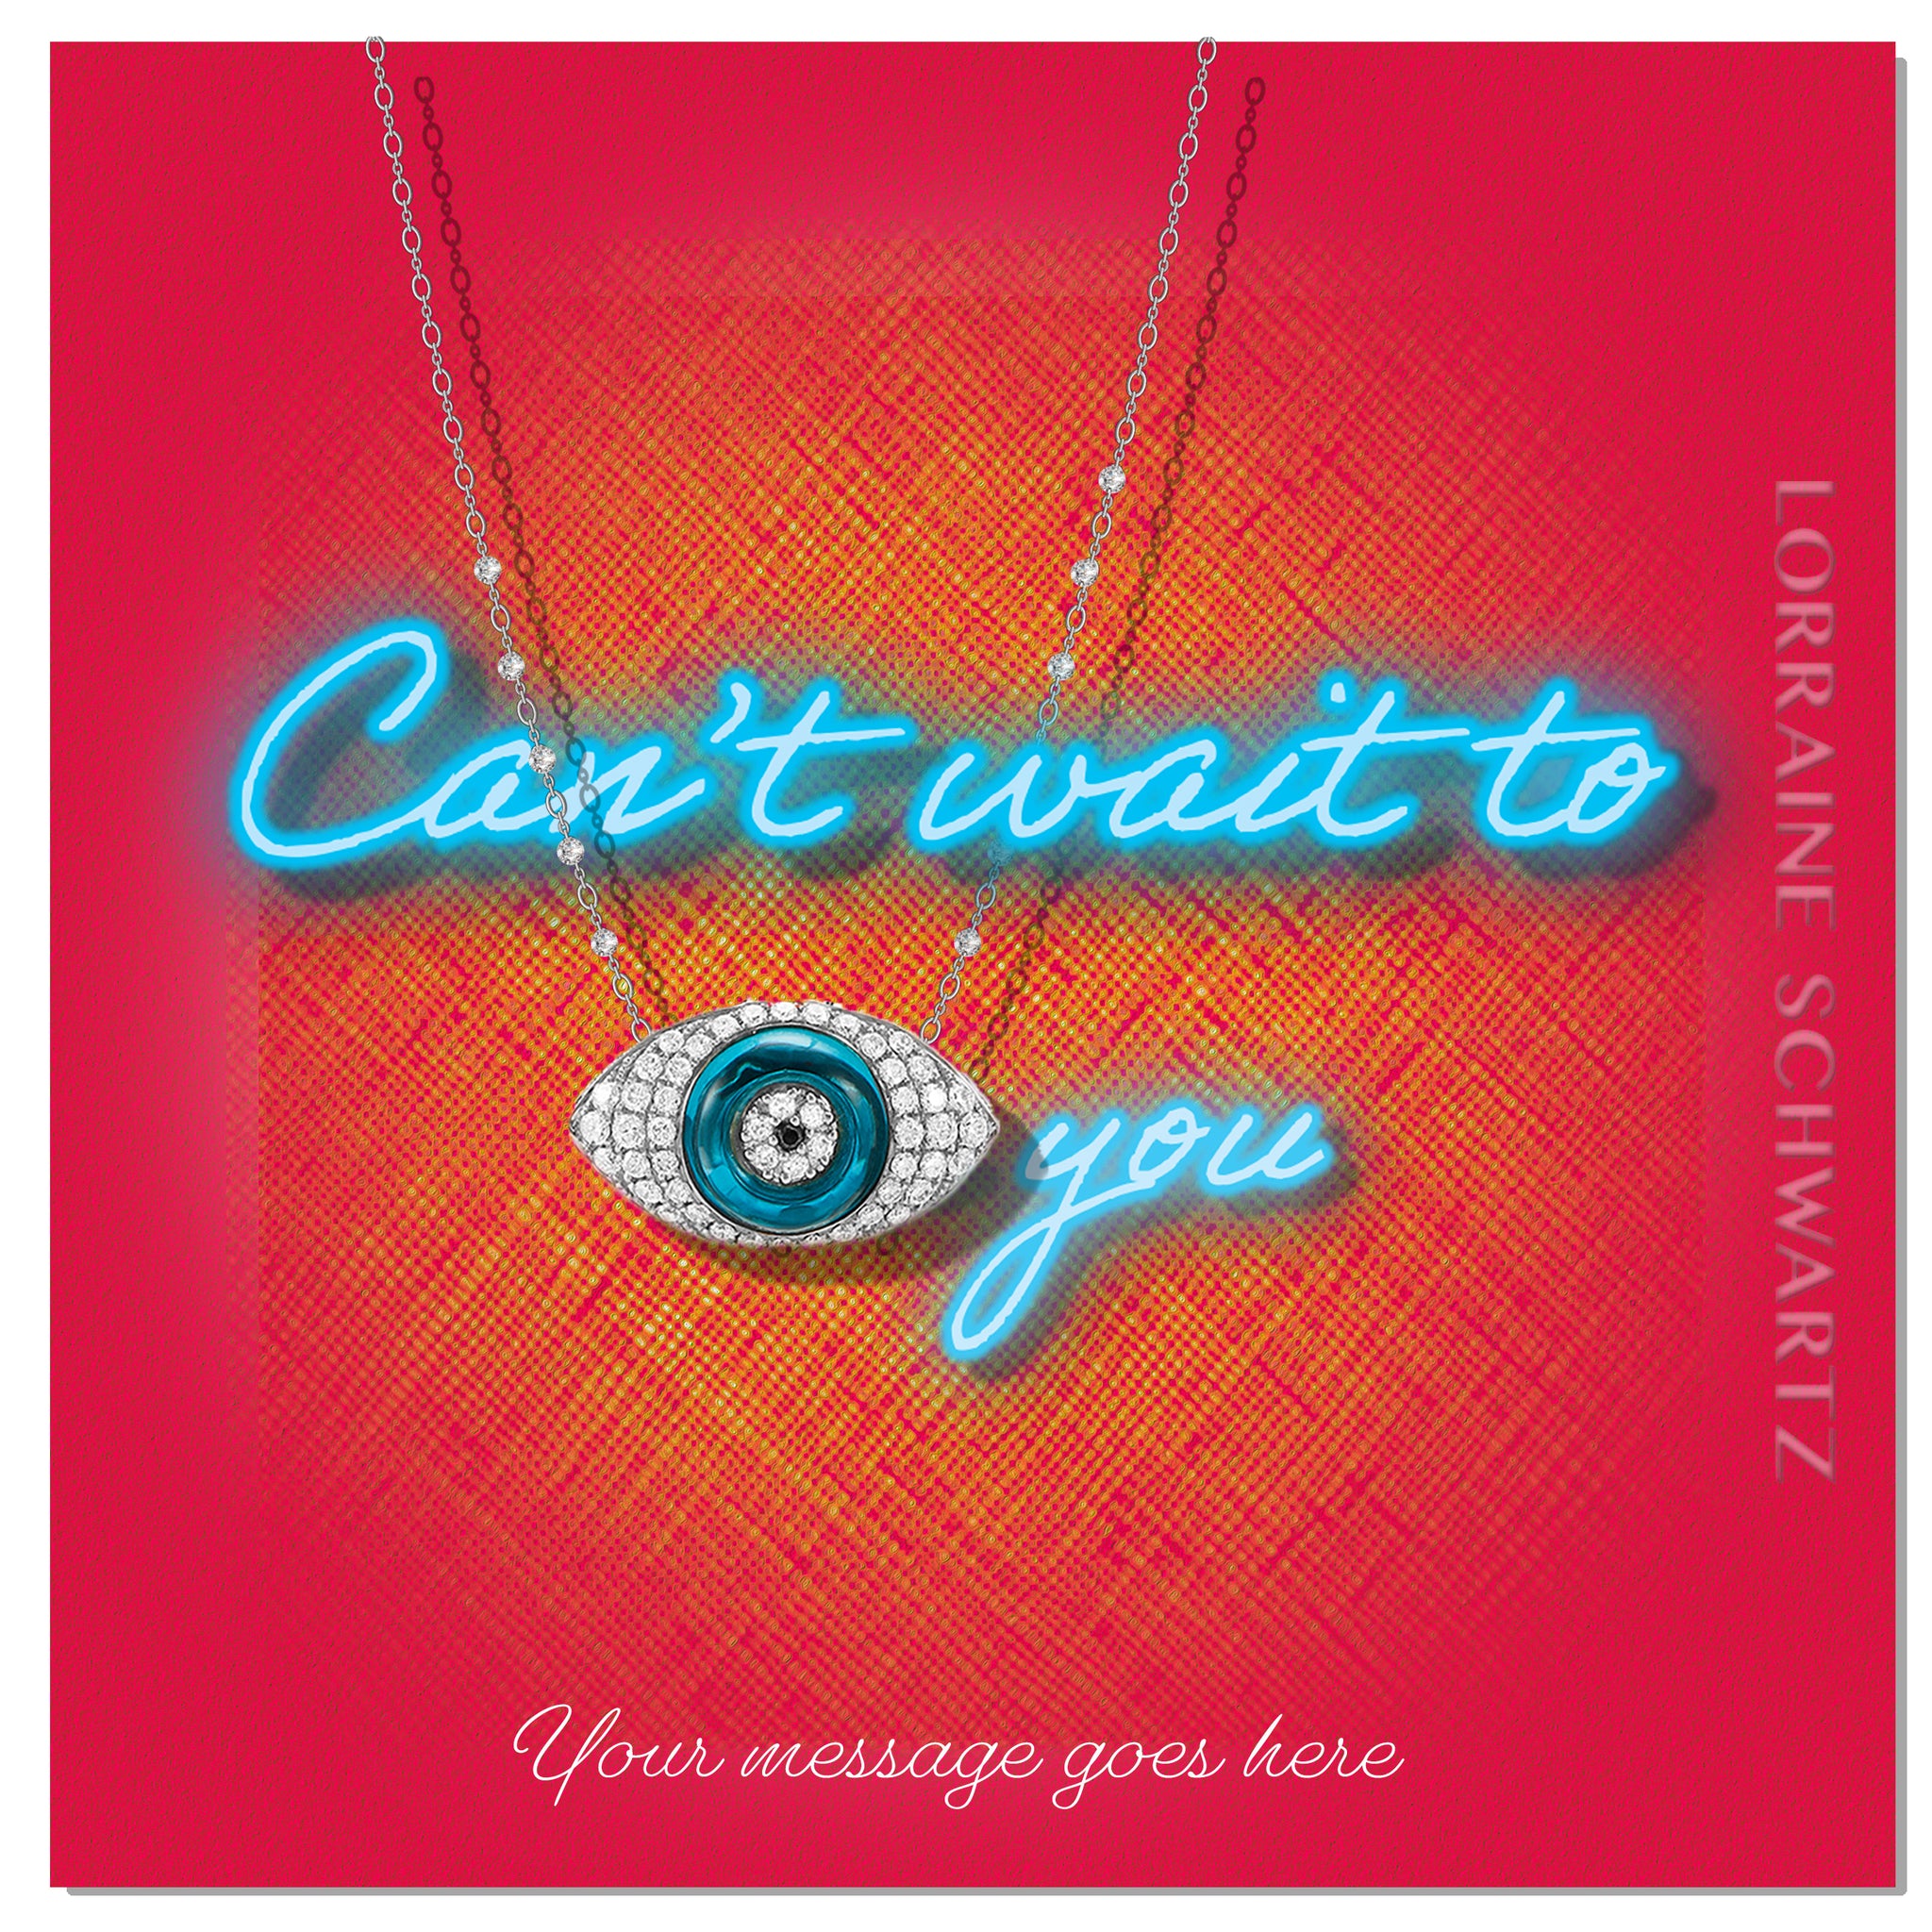 “Eye Can’t Wait to See You” Mixed Media Neon Card